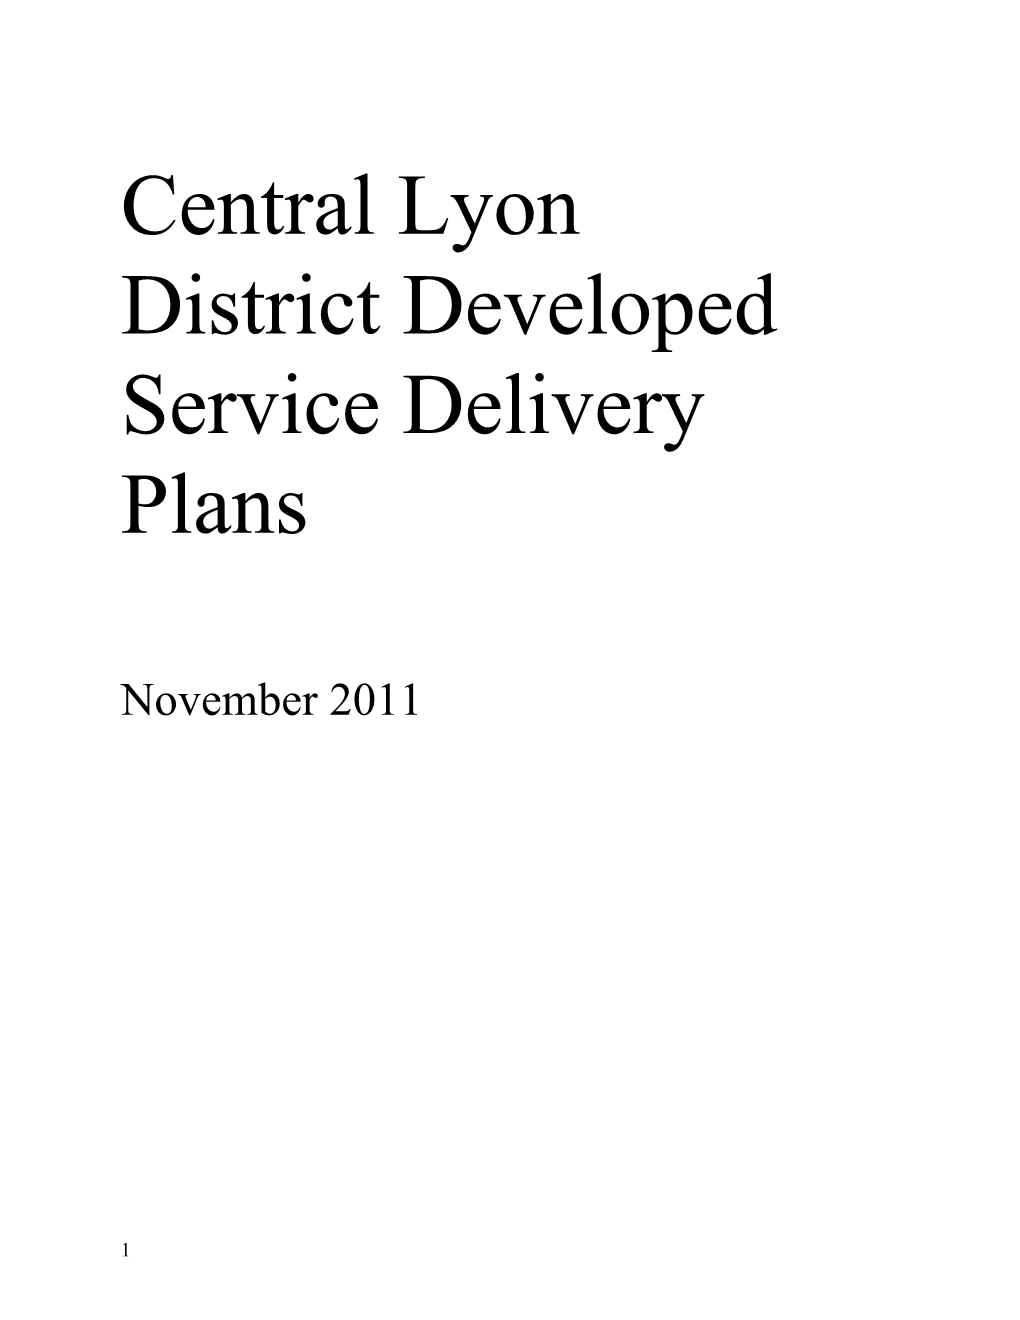 District Developed Service Delivery Plans